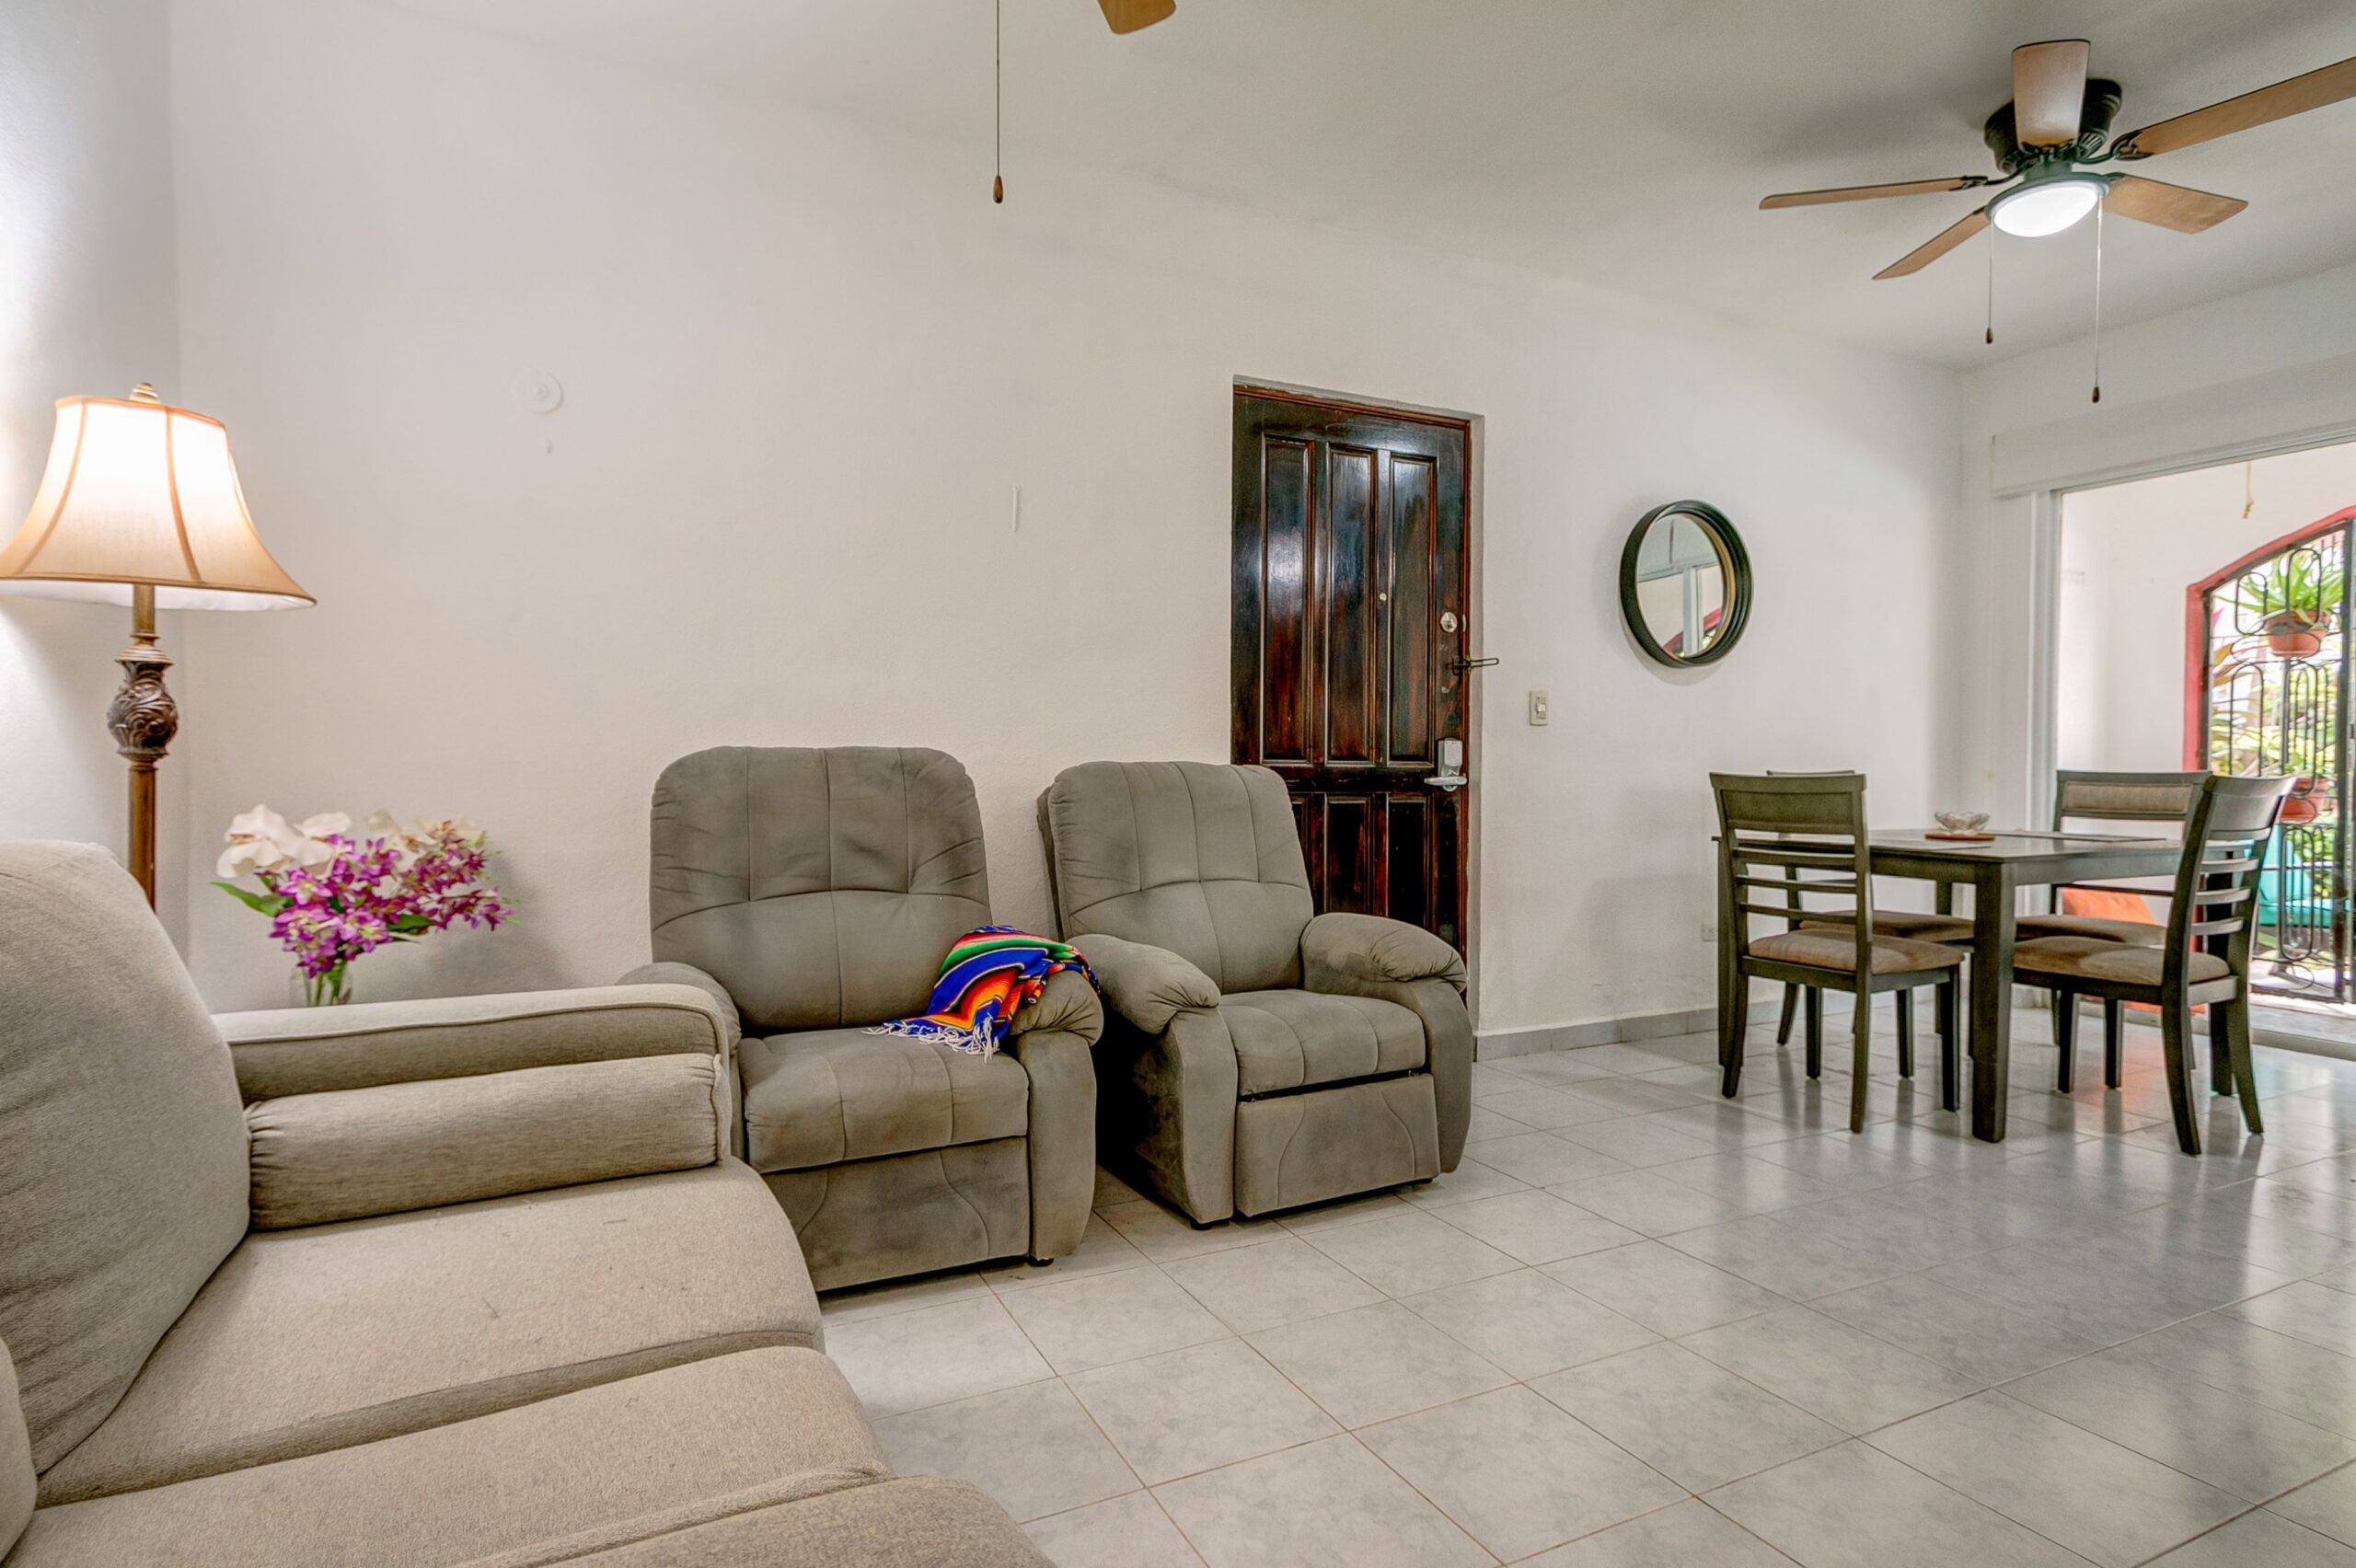 c apartment for sale in playacar gaviotas living area to dining area